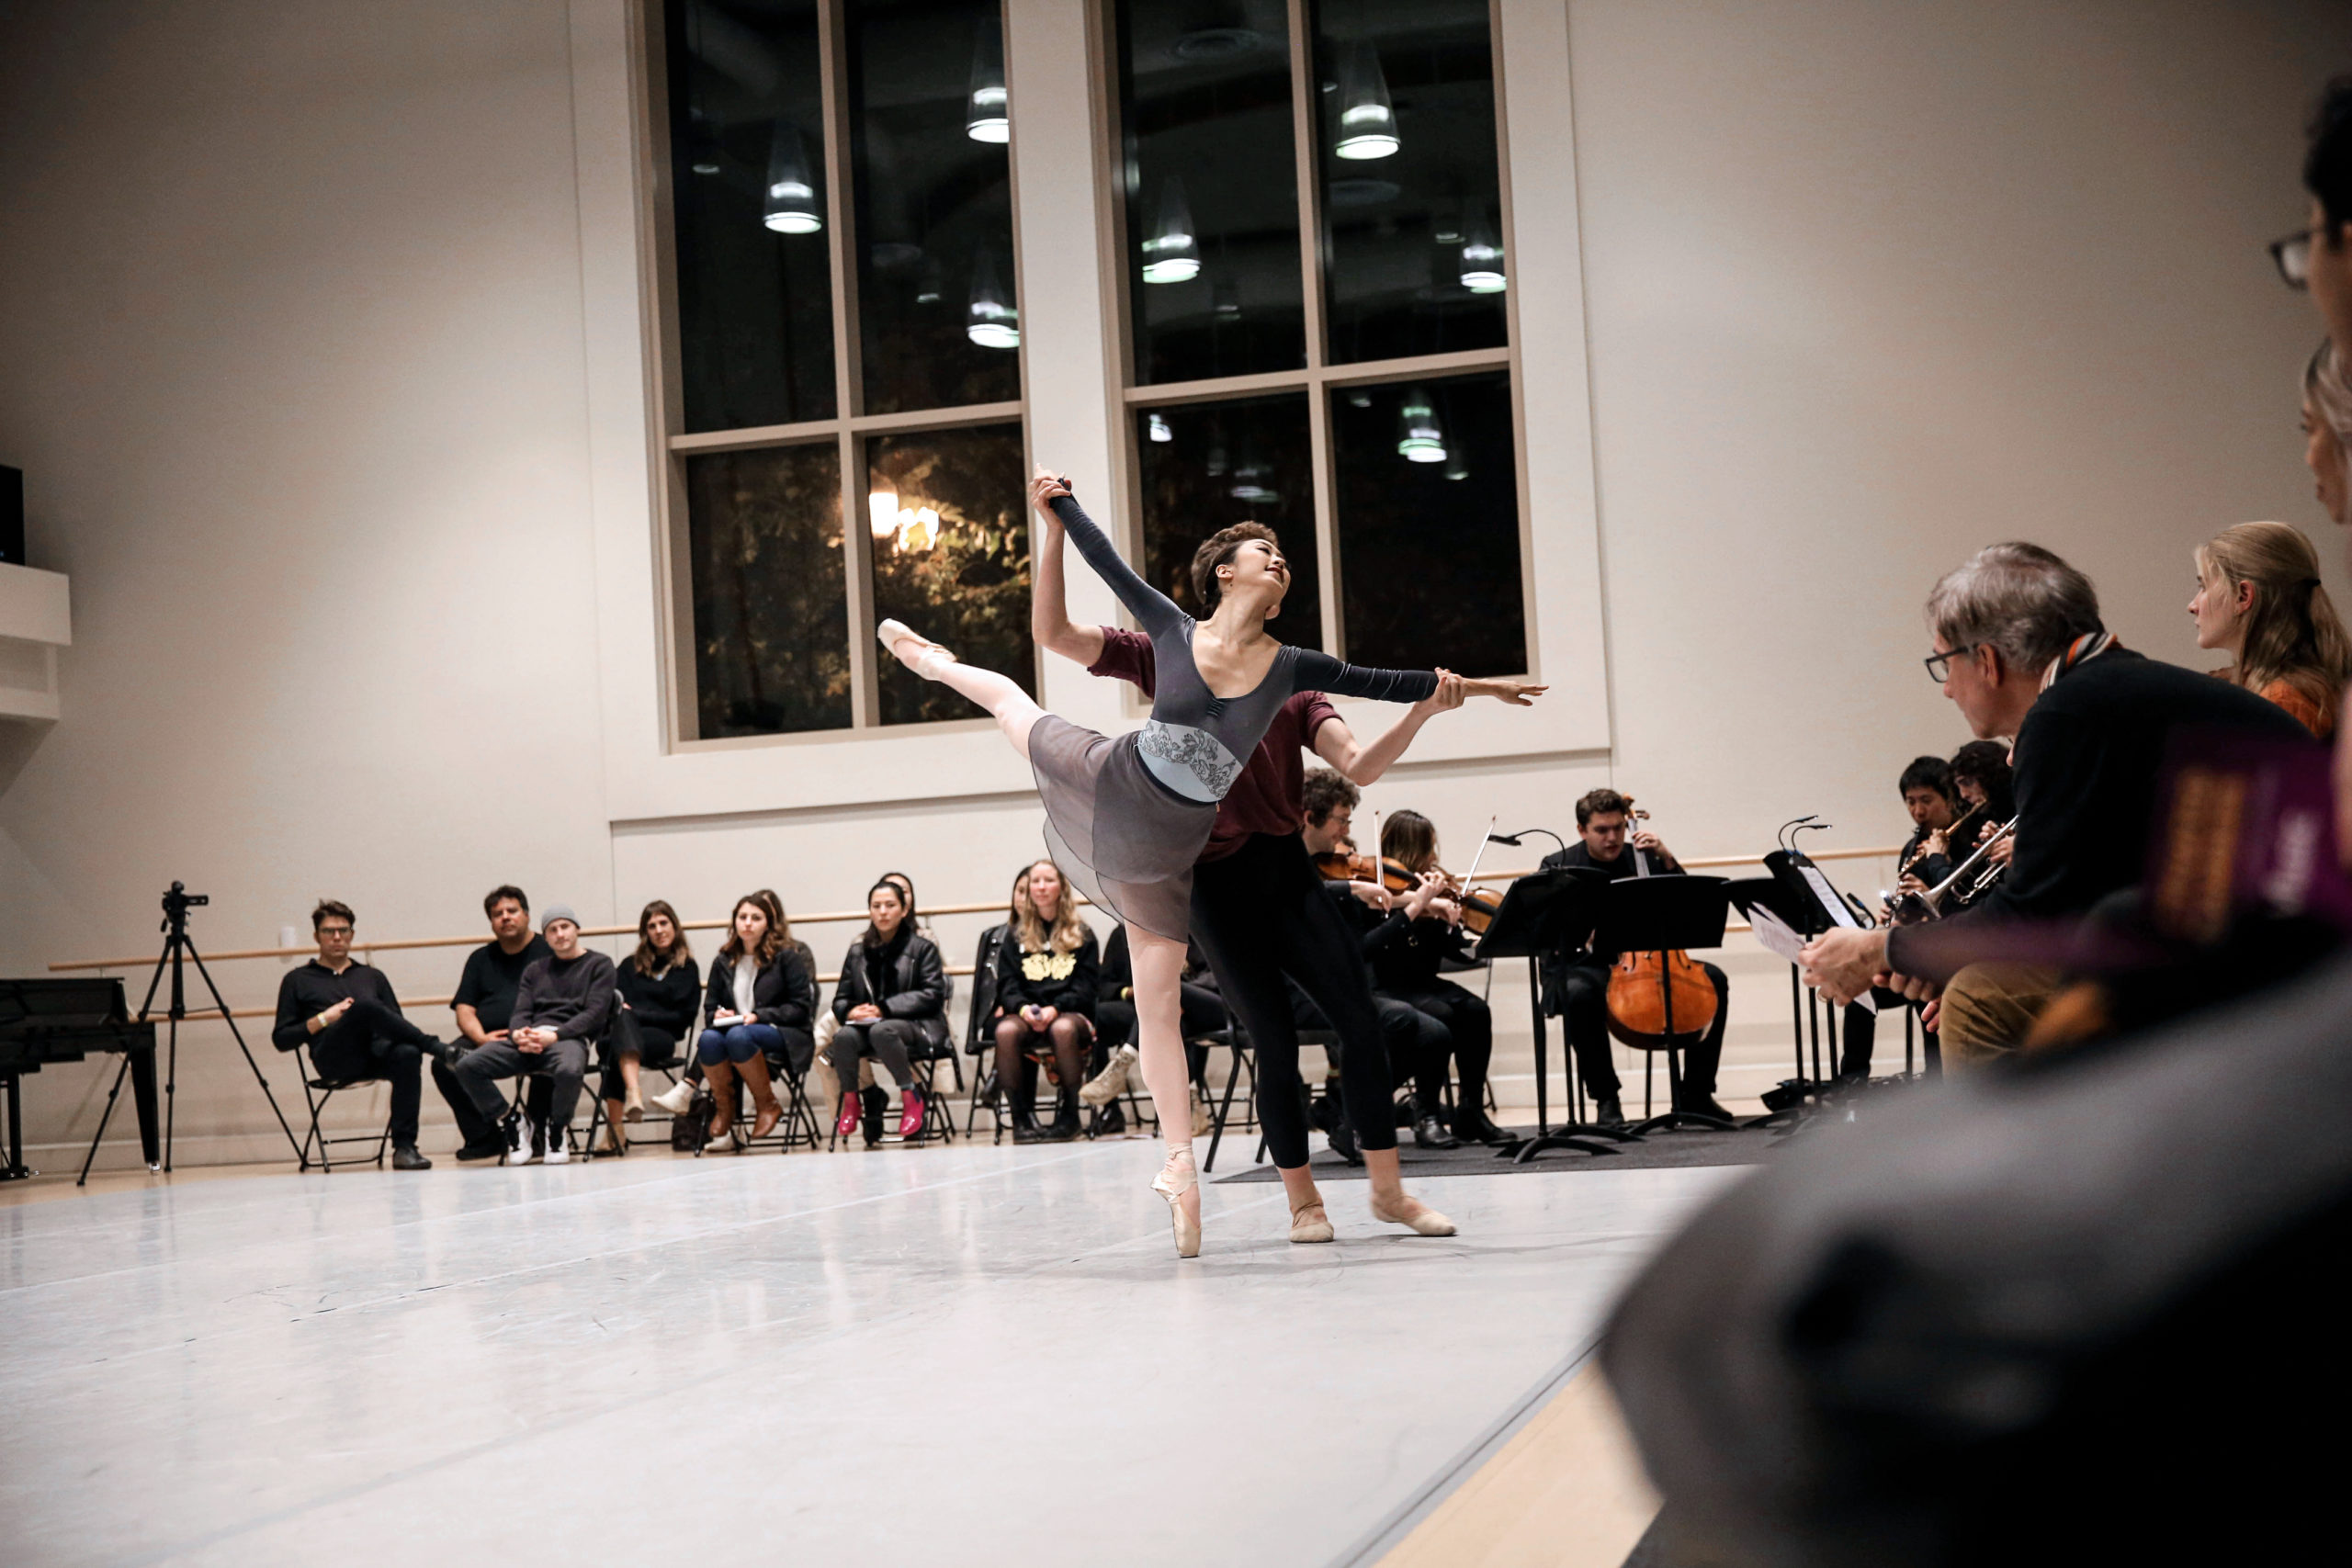 A dancer in pointe shoes, pink tights, a ballet skirt and long-sleeved leotard balances in arabesque, held at the wrists by a partner. Beyond the pair, off the marley, a cluster of musicians. Around the edges of the space, spectators watch from chairs.